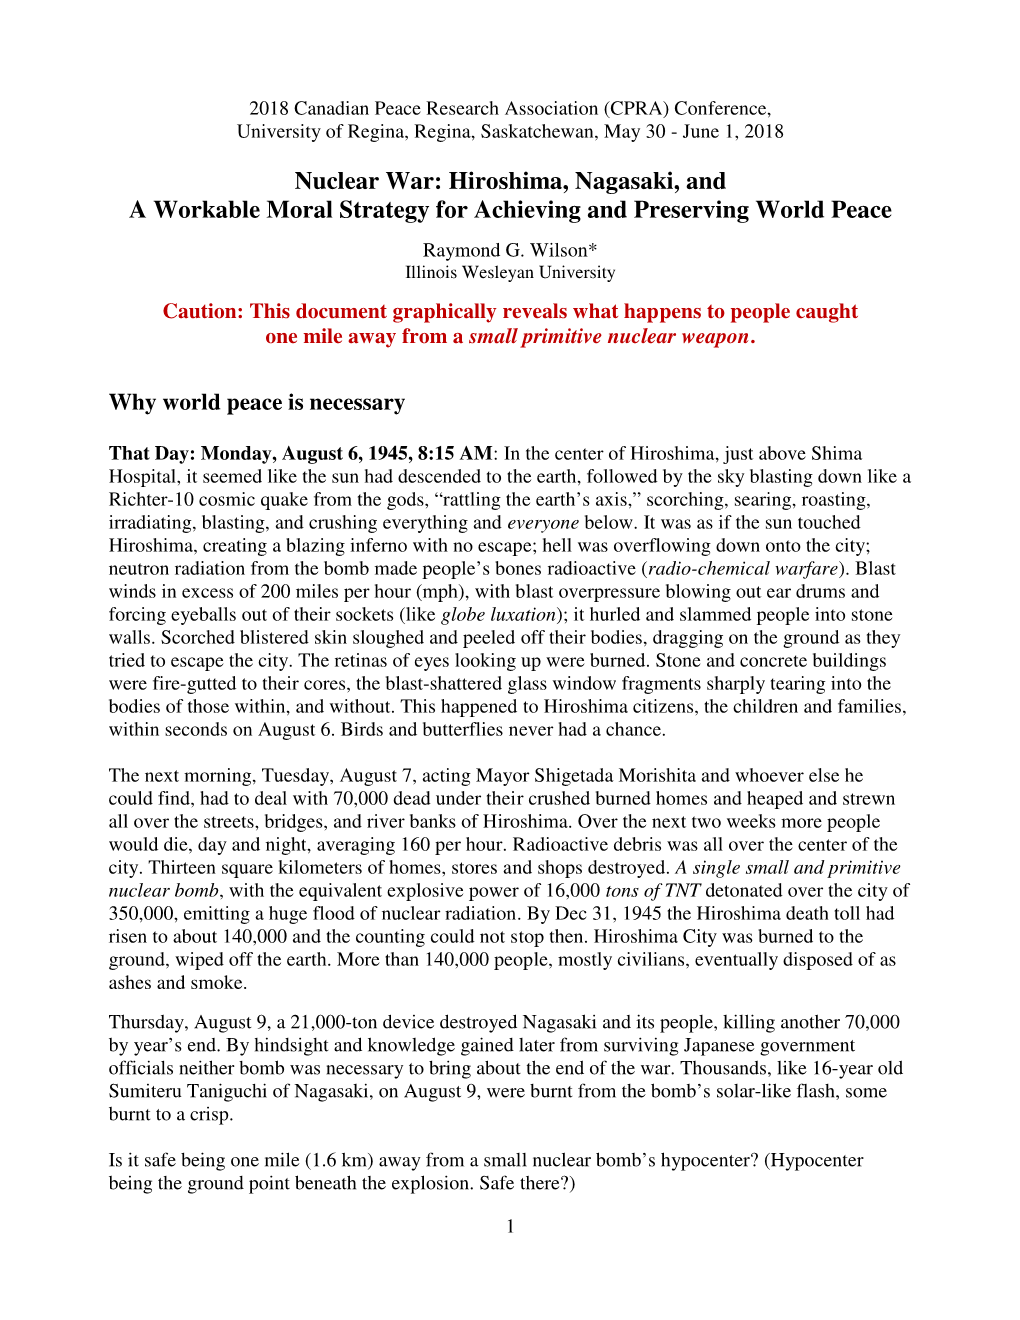 Nuclear War: Hiroshima, Nagasaki, and a Workable Moral Strategy for Achieving and Preserving World Peace